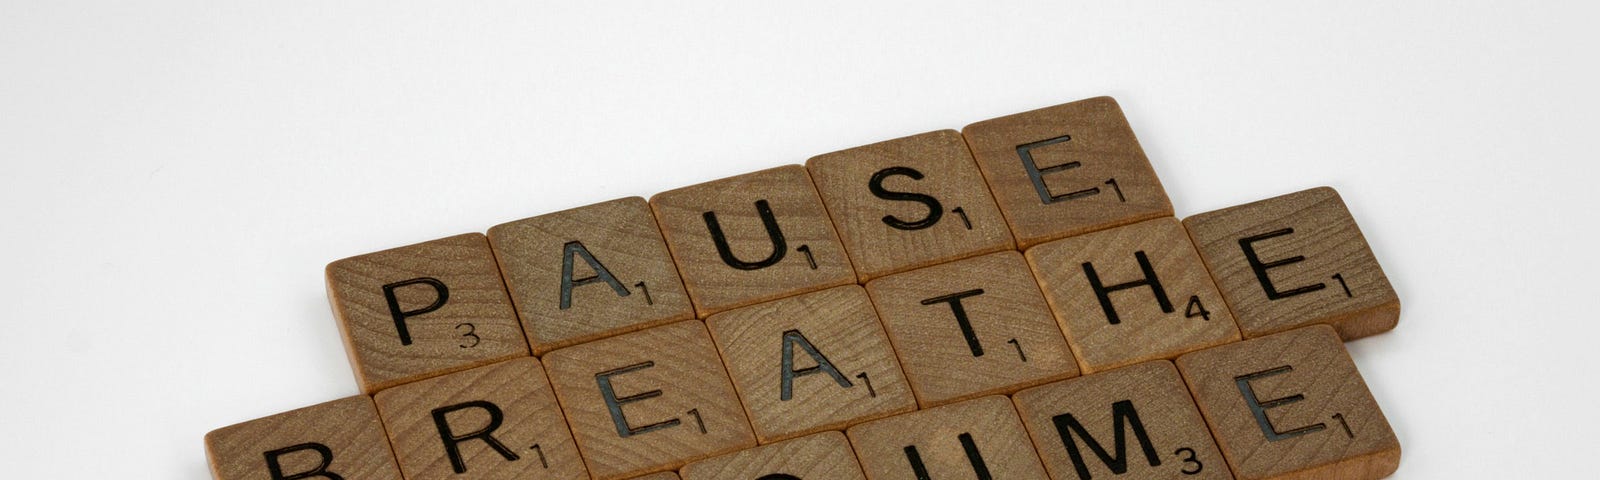 Scrabble tiles spelling out “Pause, Breathe, Resume”